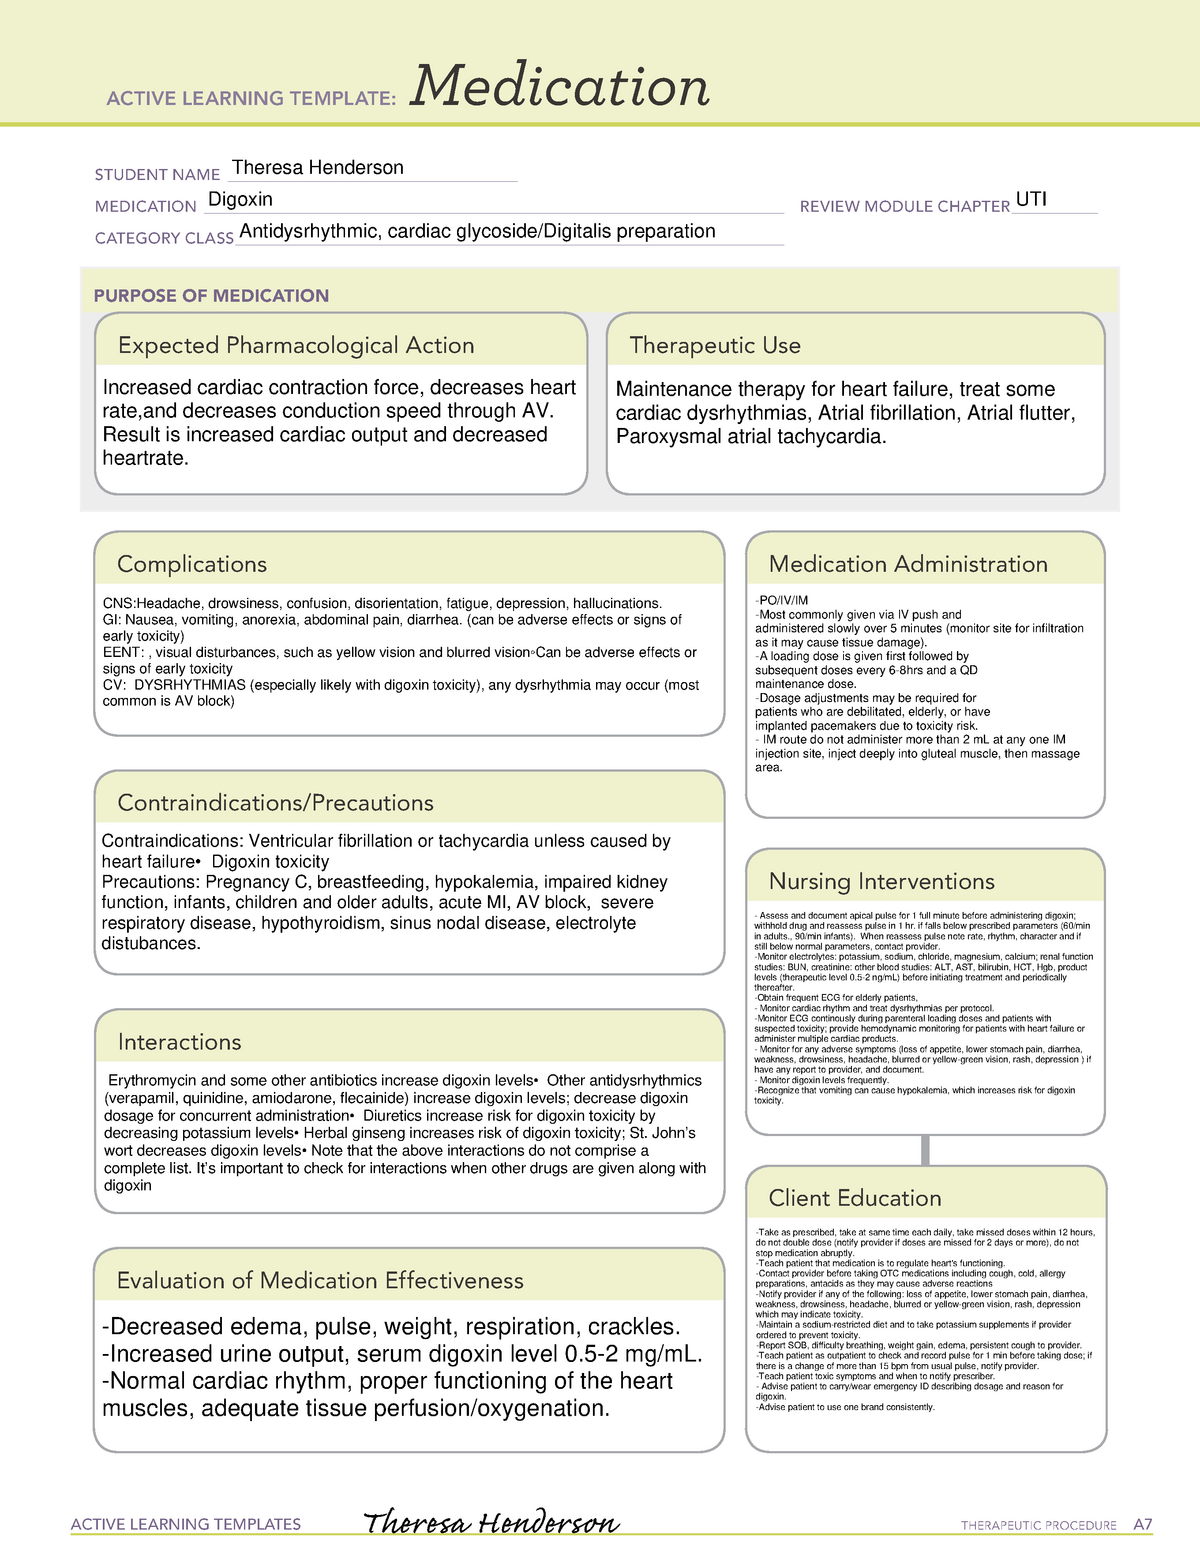 medication-digoxin-signed-active-learning-templates-therapeutic-procedure-a-medication